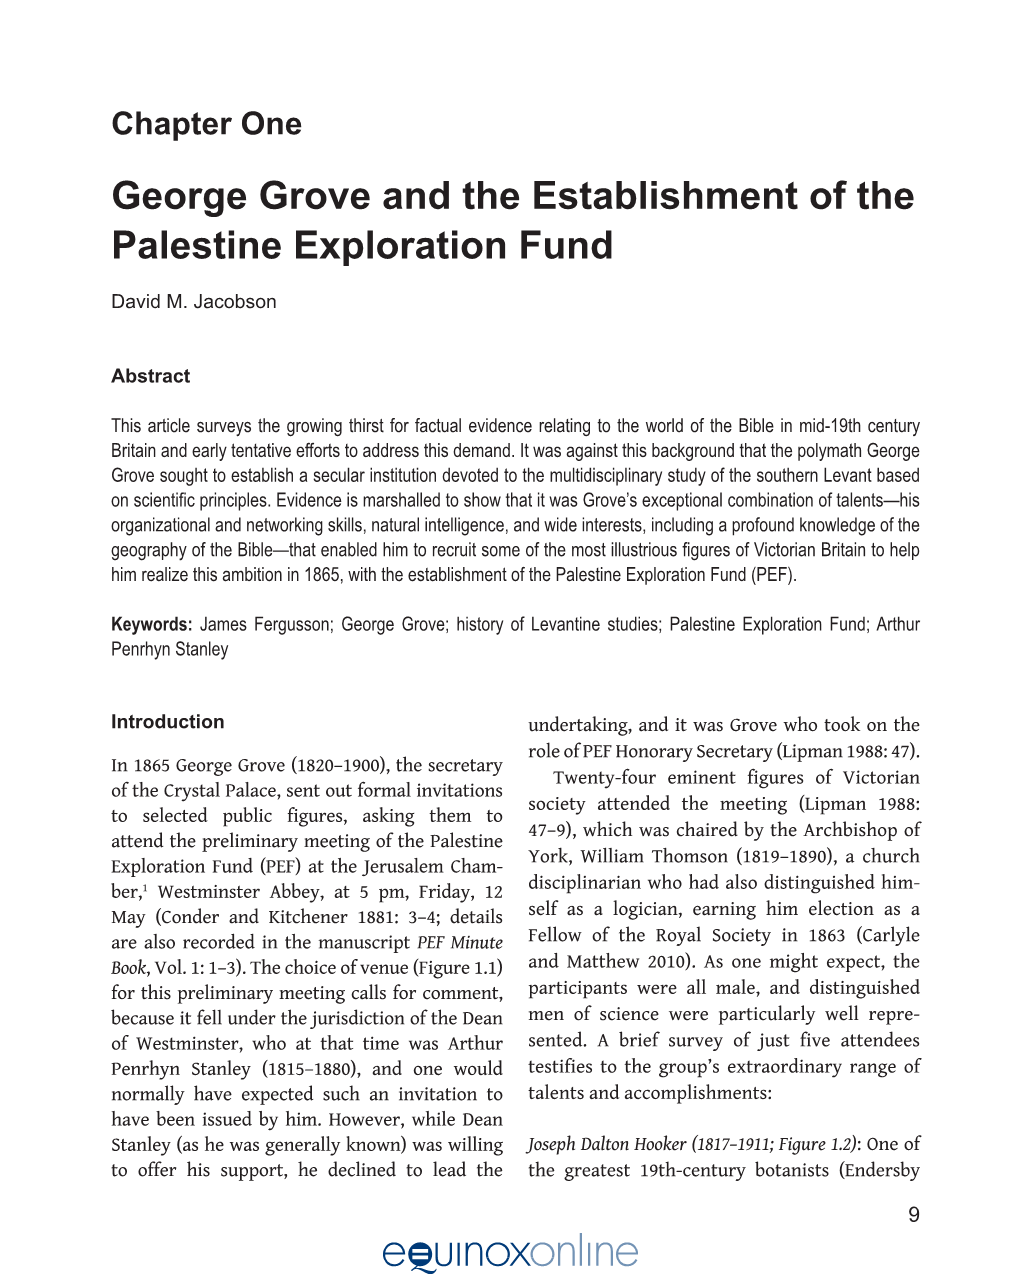 George Grove and the Establishment of the Palestine Exploration Fund